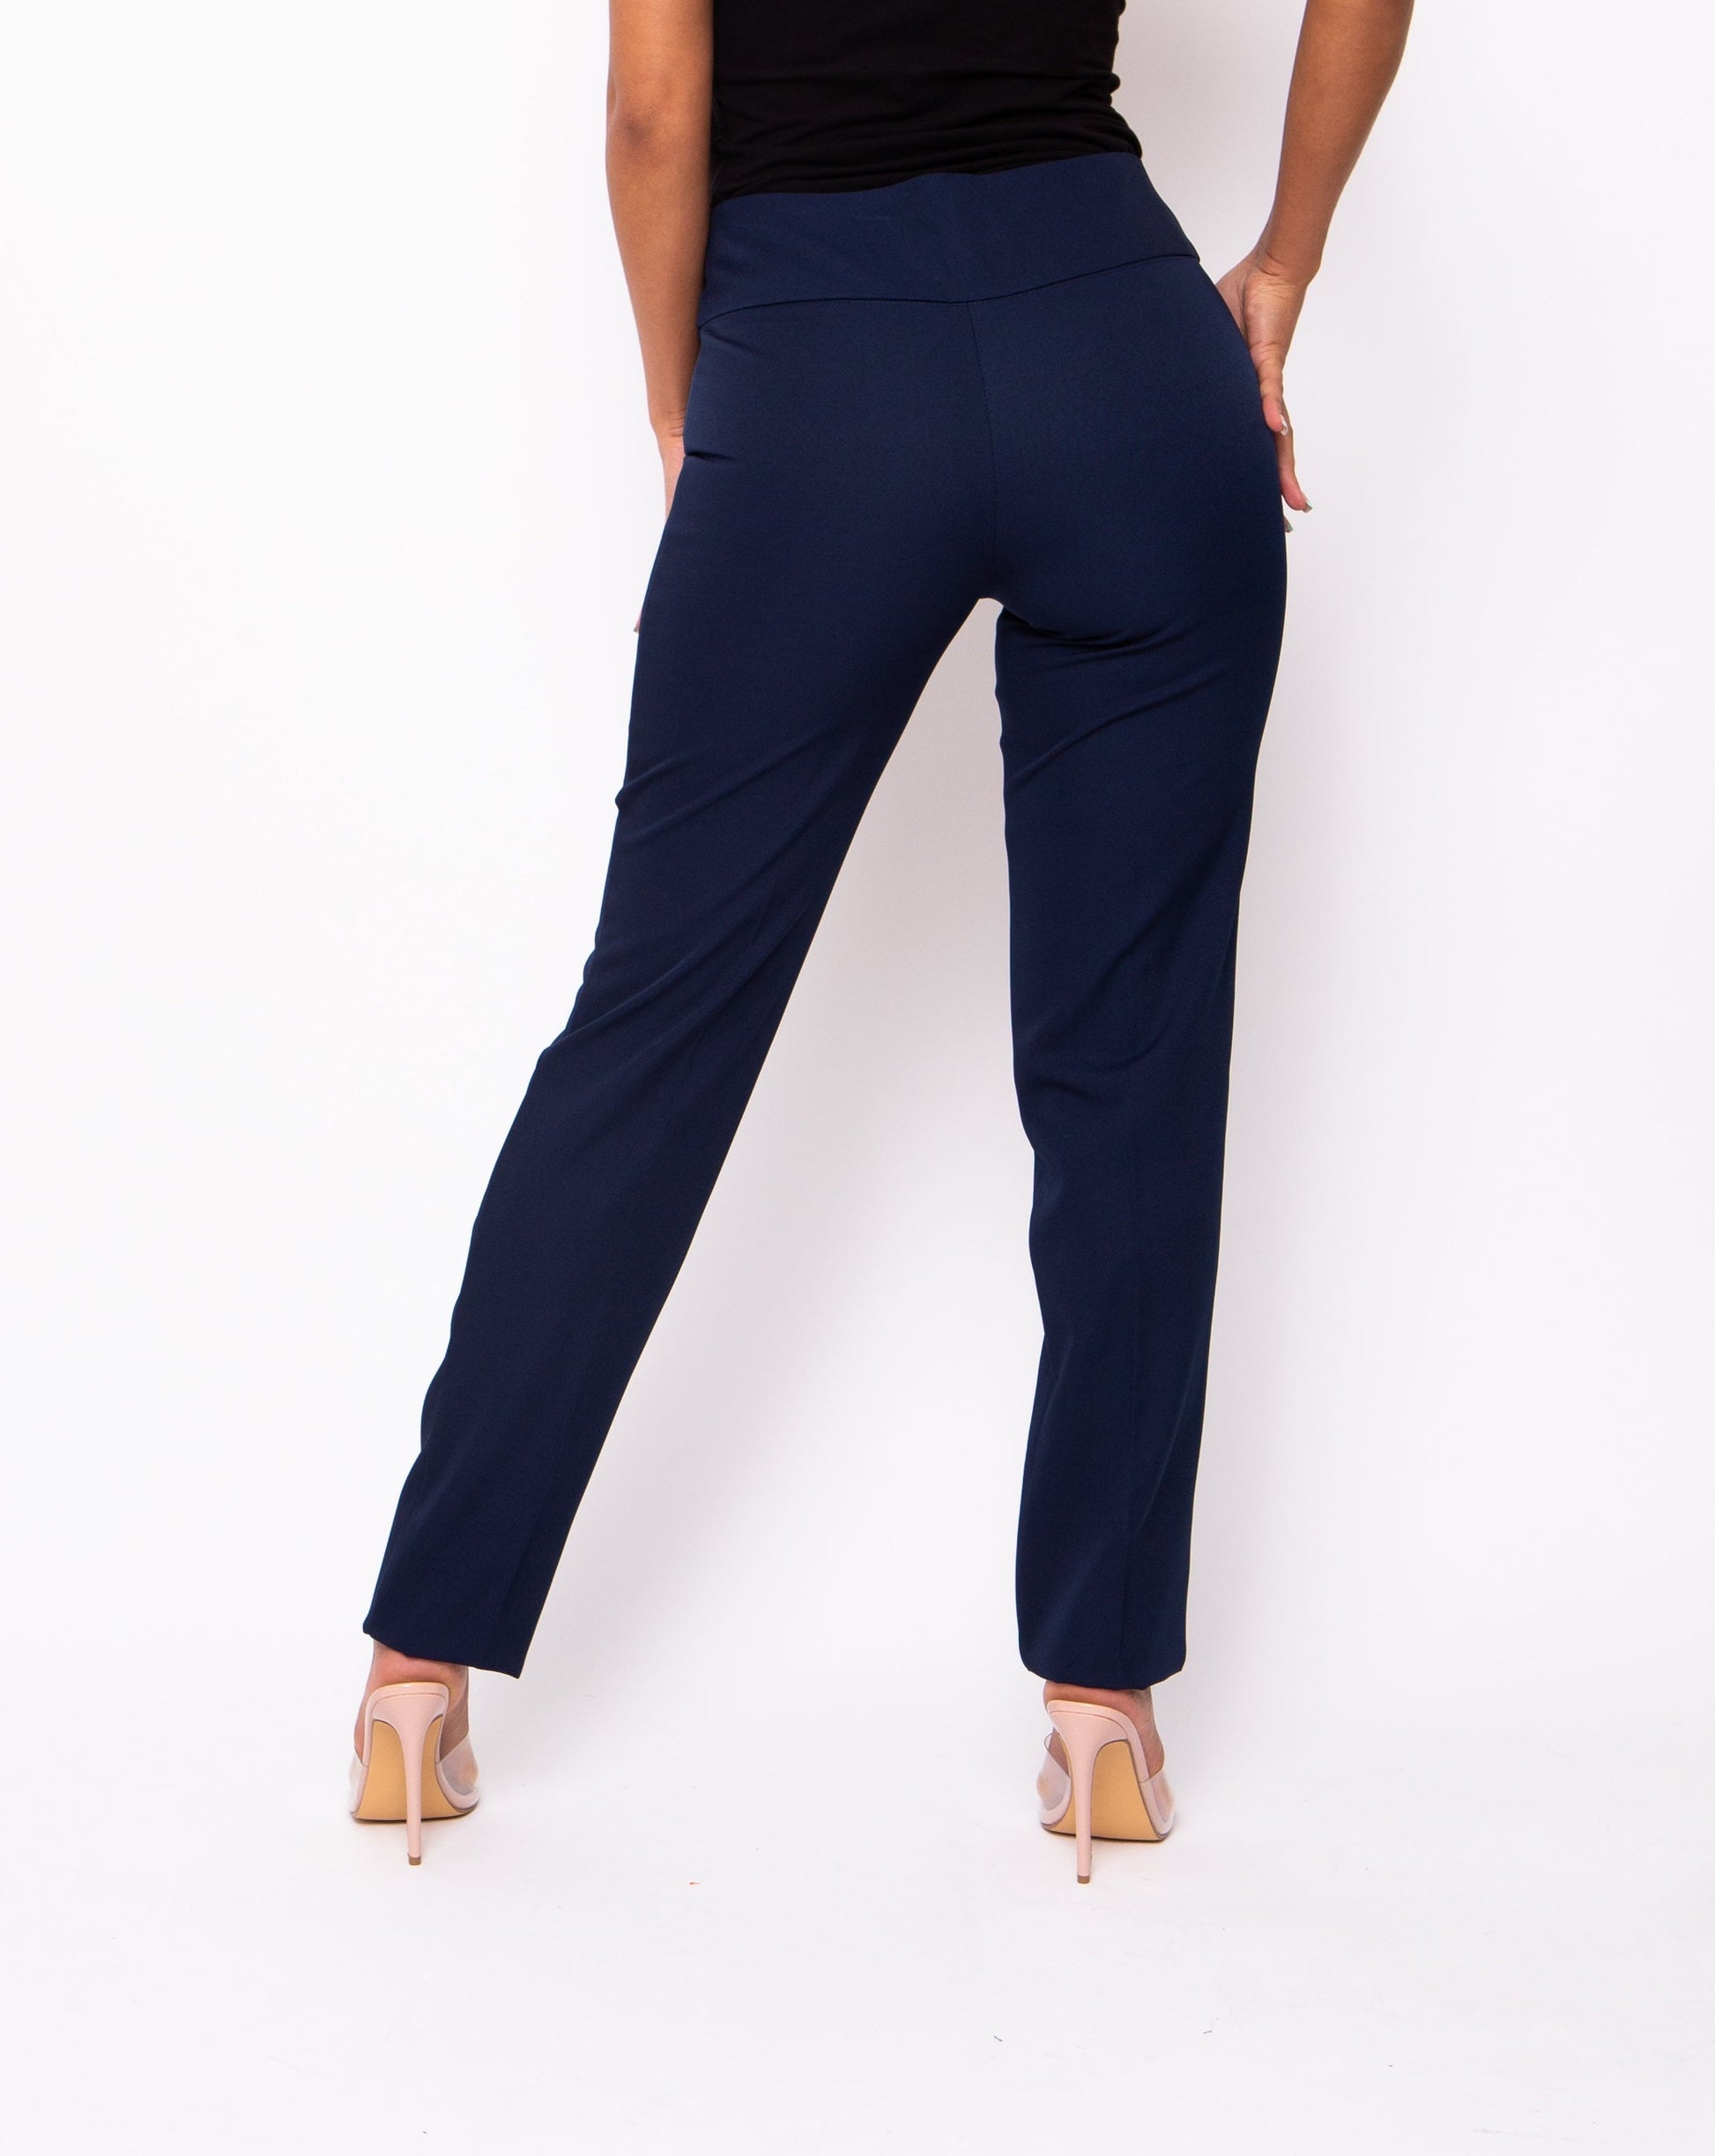 Ladies Navy Blue Work Trousers  Straight Leg Trousers Womens